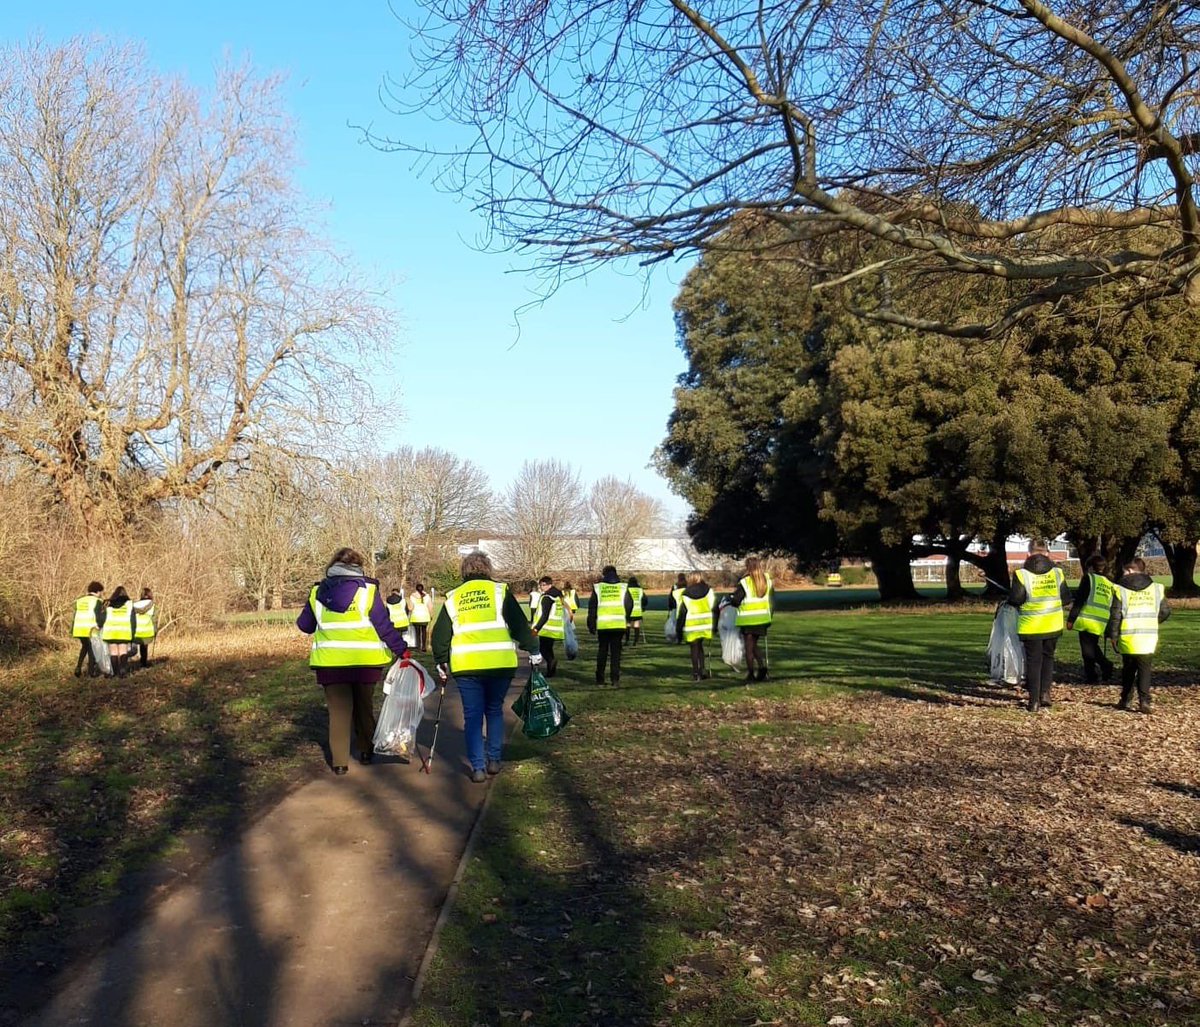 Amazing morning @BrockhillPark with our students volunteering in the community by litter picking @volunteering_uk @FHextraordinary @fstonehythedc